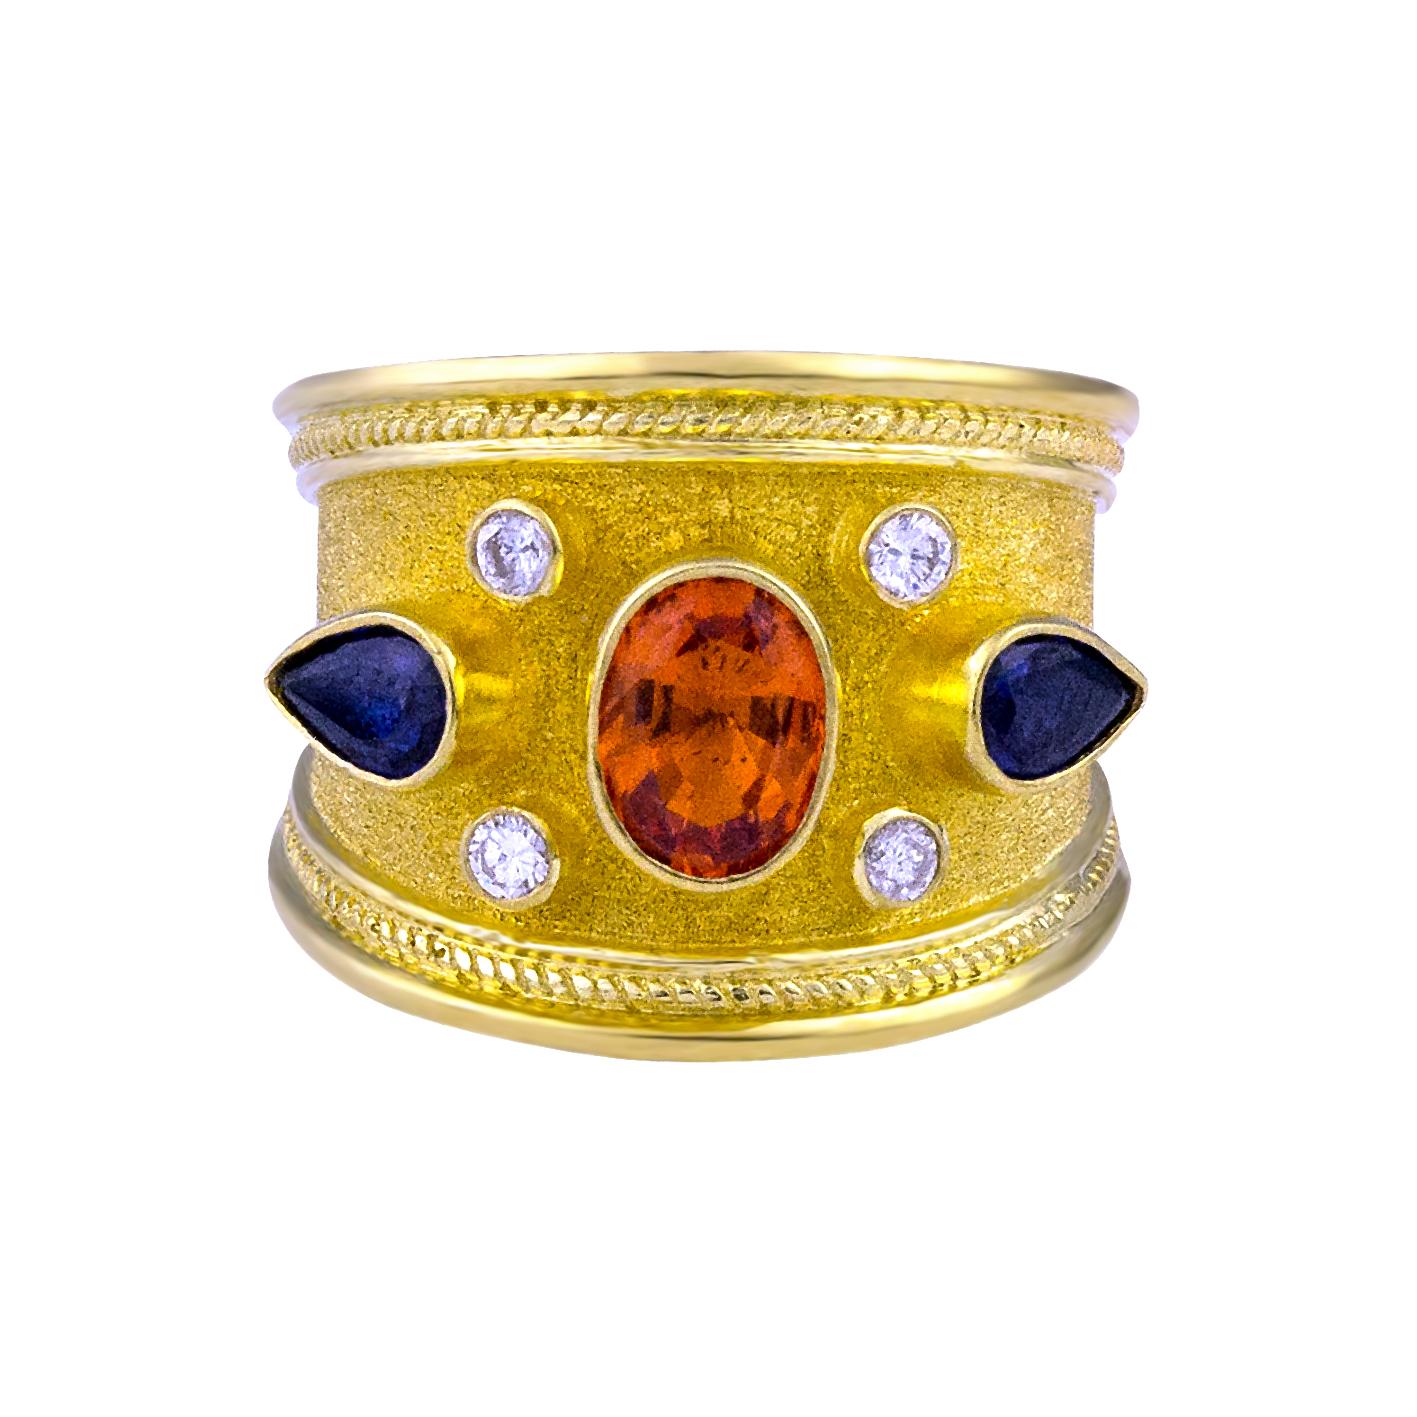 S.Georgios Hand Made 18 Karat Yellow Gold Ring decorated with Byzantine-style granulation and the unique velvet finish on the background. The stunning ring features 4 Diamonds total weight of 0.20 Carat and 3 Sapphires. In the center, we have an